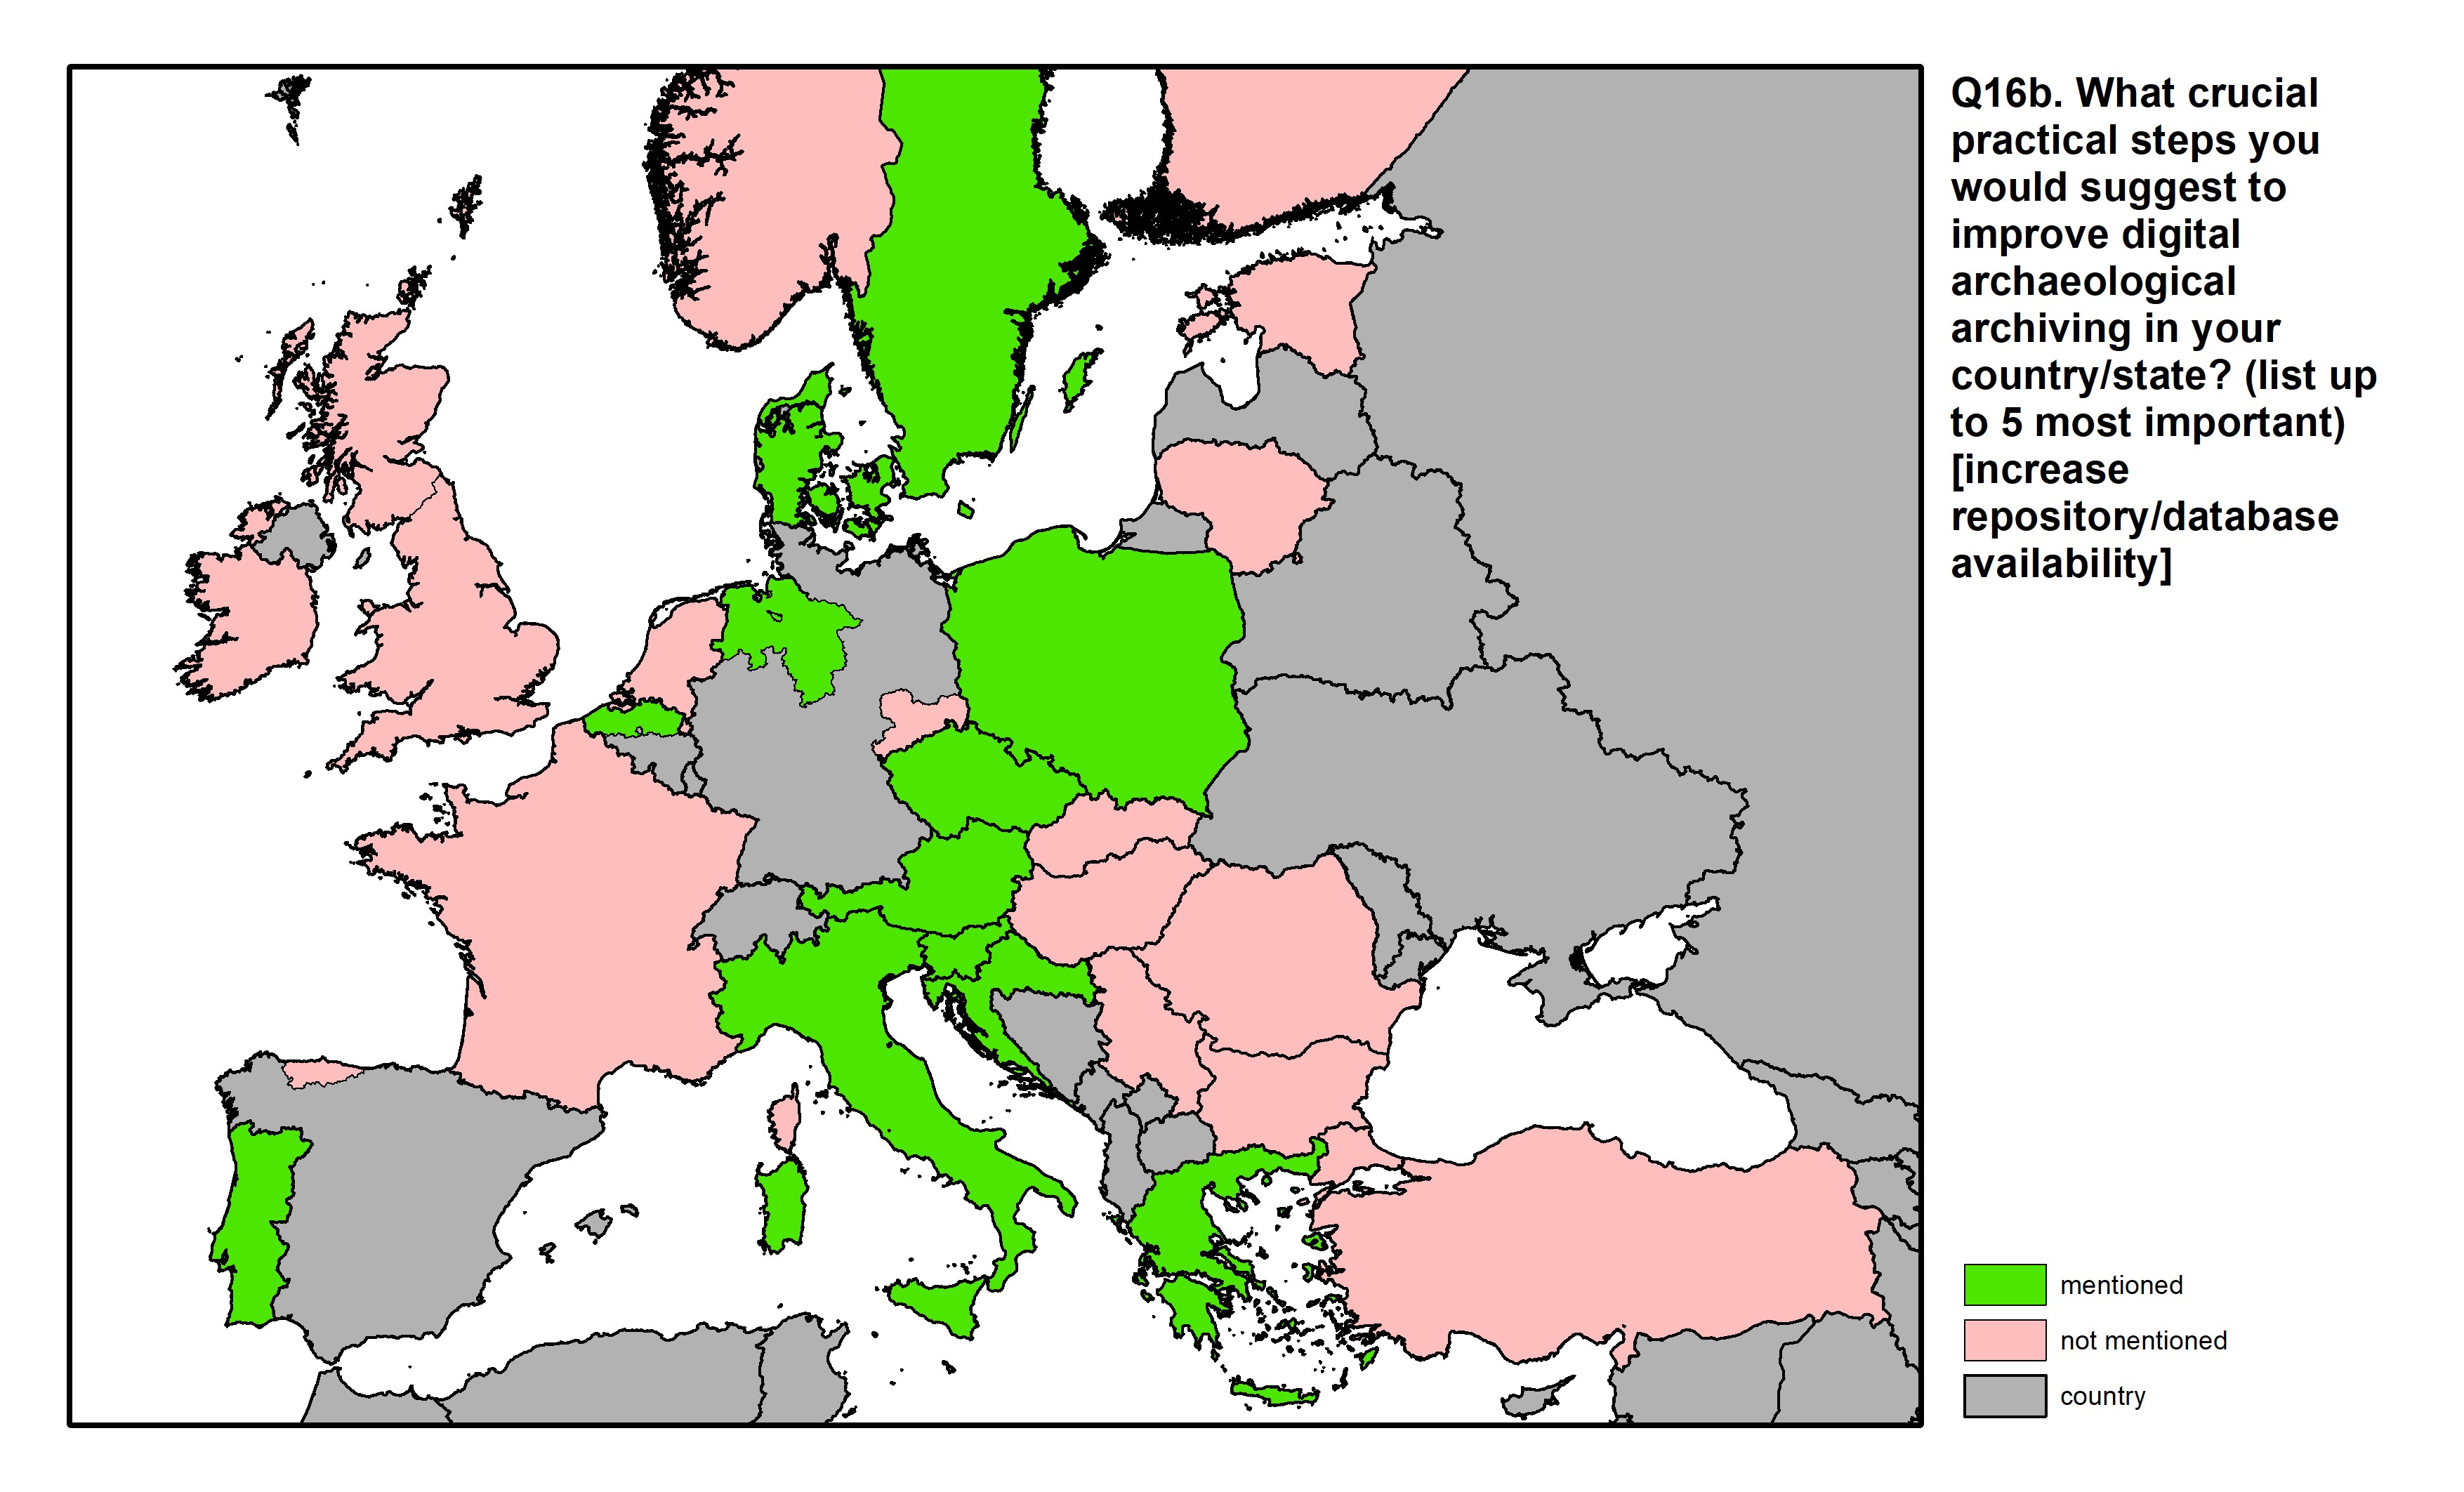 Figure 57: a map of Europe showing countries and regions in colour based on response rates to the survey question.